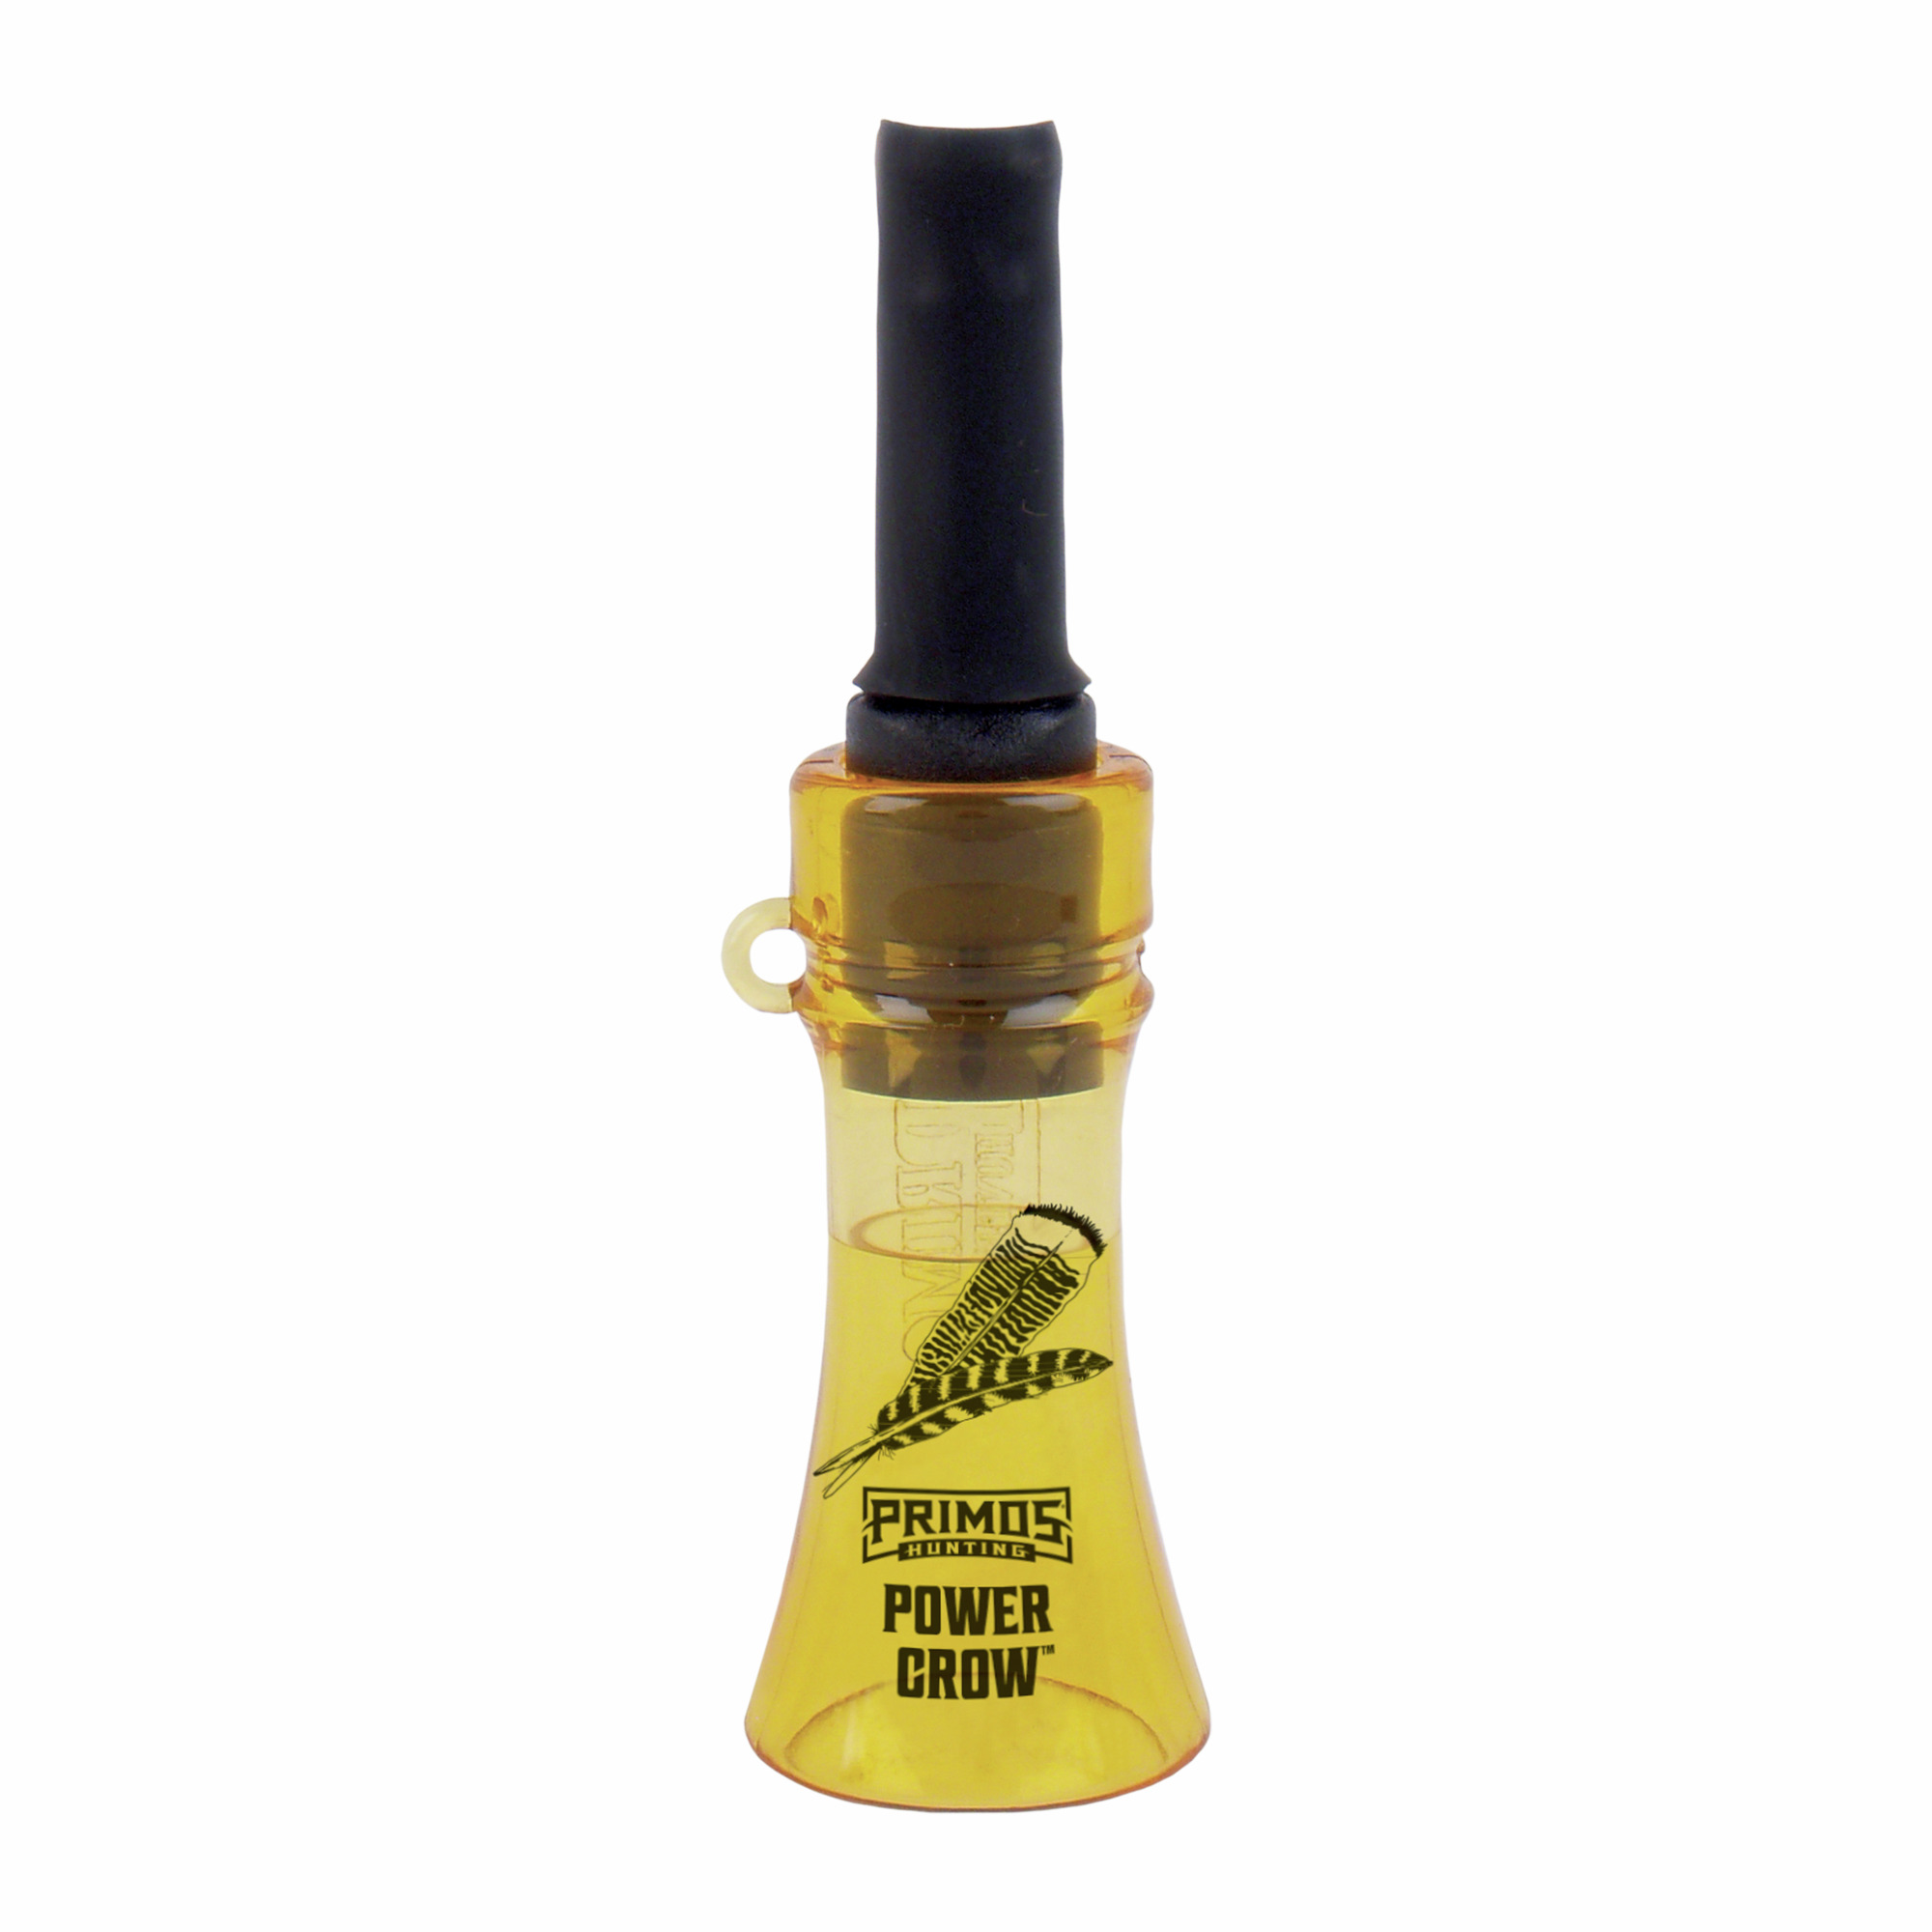 Primos Power Crow Call For Hunting Shooting Crows And Turkey Caller Decoy 